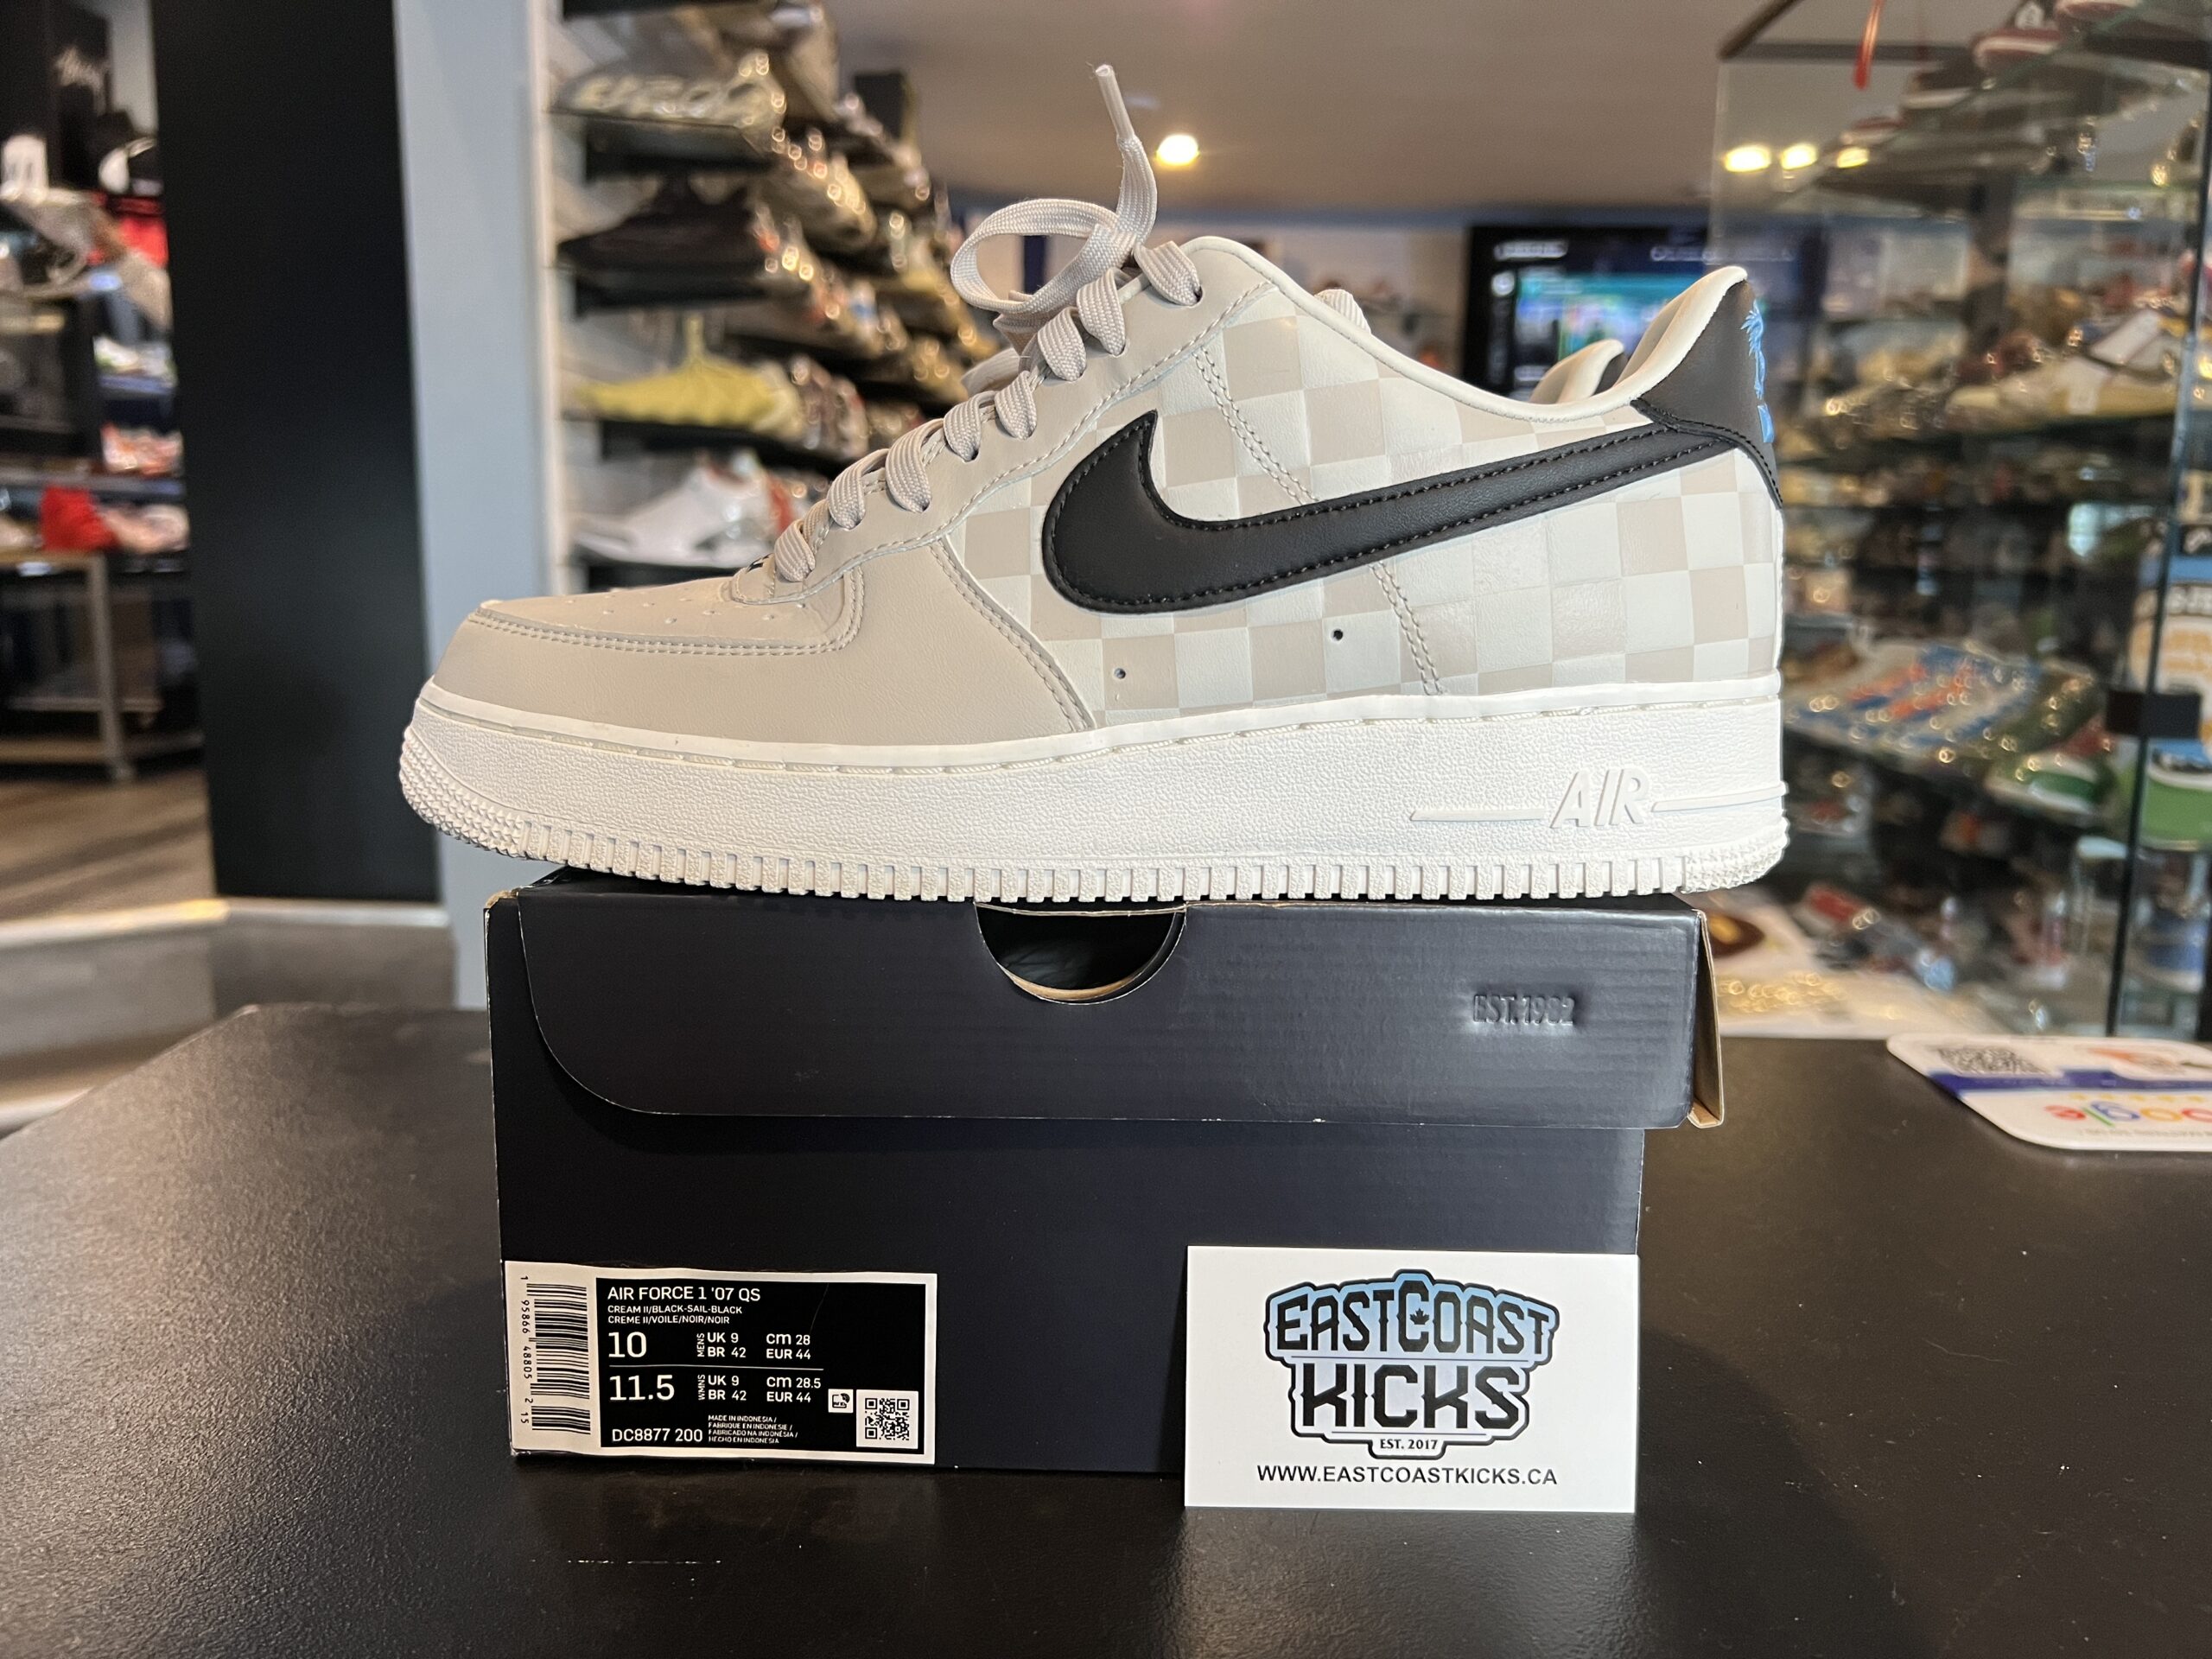 Preowned Nike Air Force 1 Low LeBron James Strive For Greatness Size 10